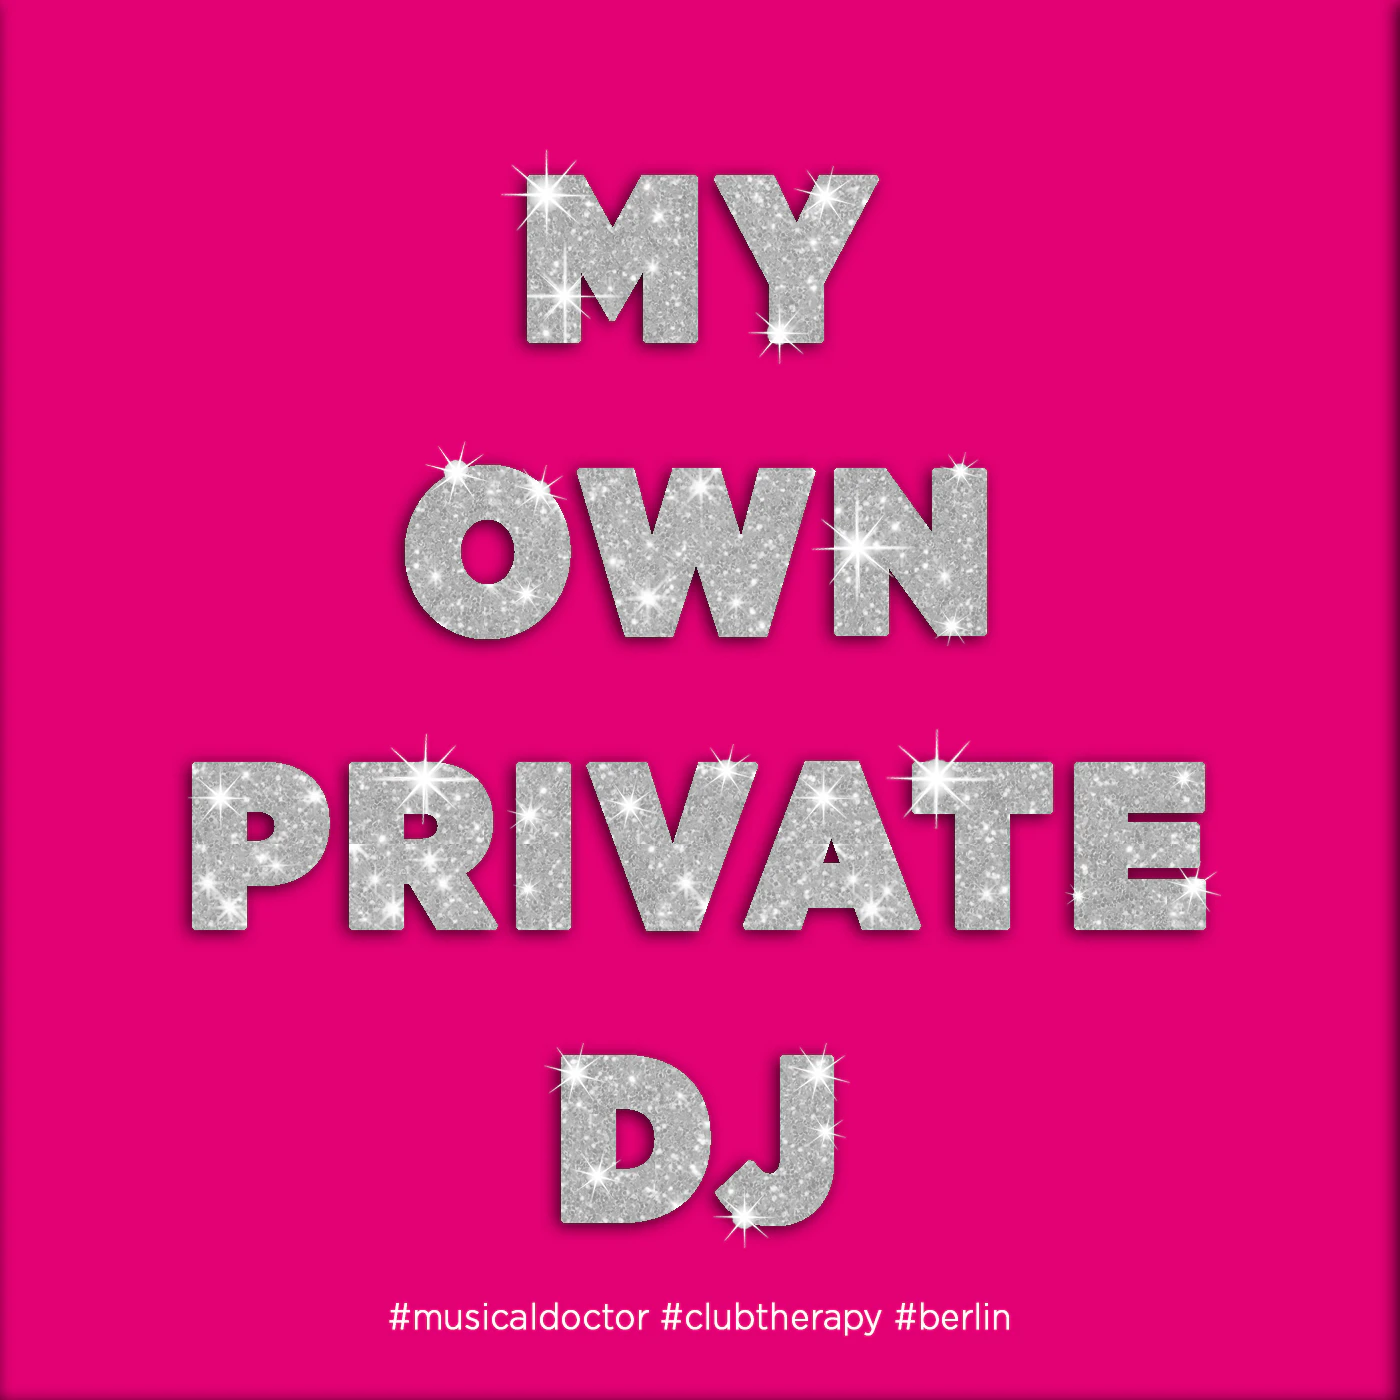 Book "My Own Private DJ" for you stay-home party in Berlin